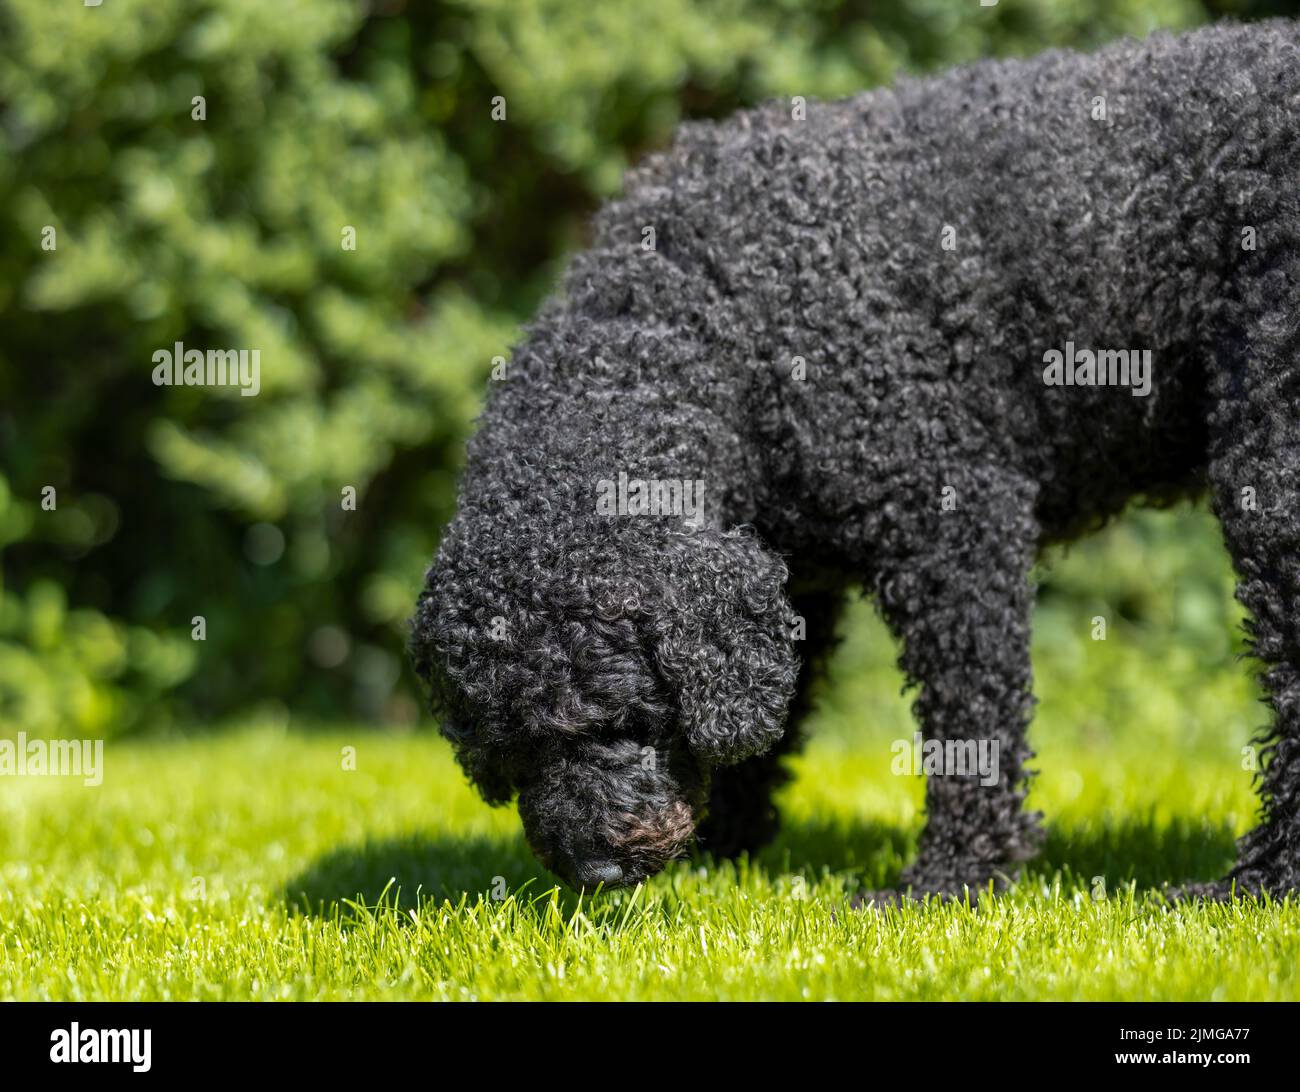 A beautiful curly haired black Labradoodle dog, sniffing a patch of lush green grass Stock Photo